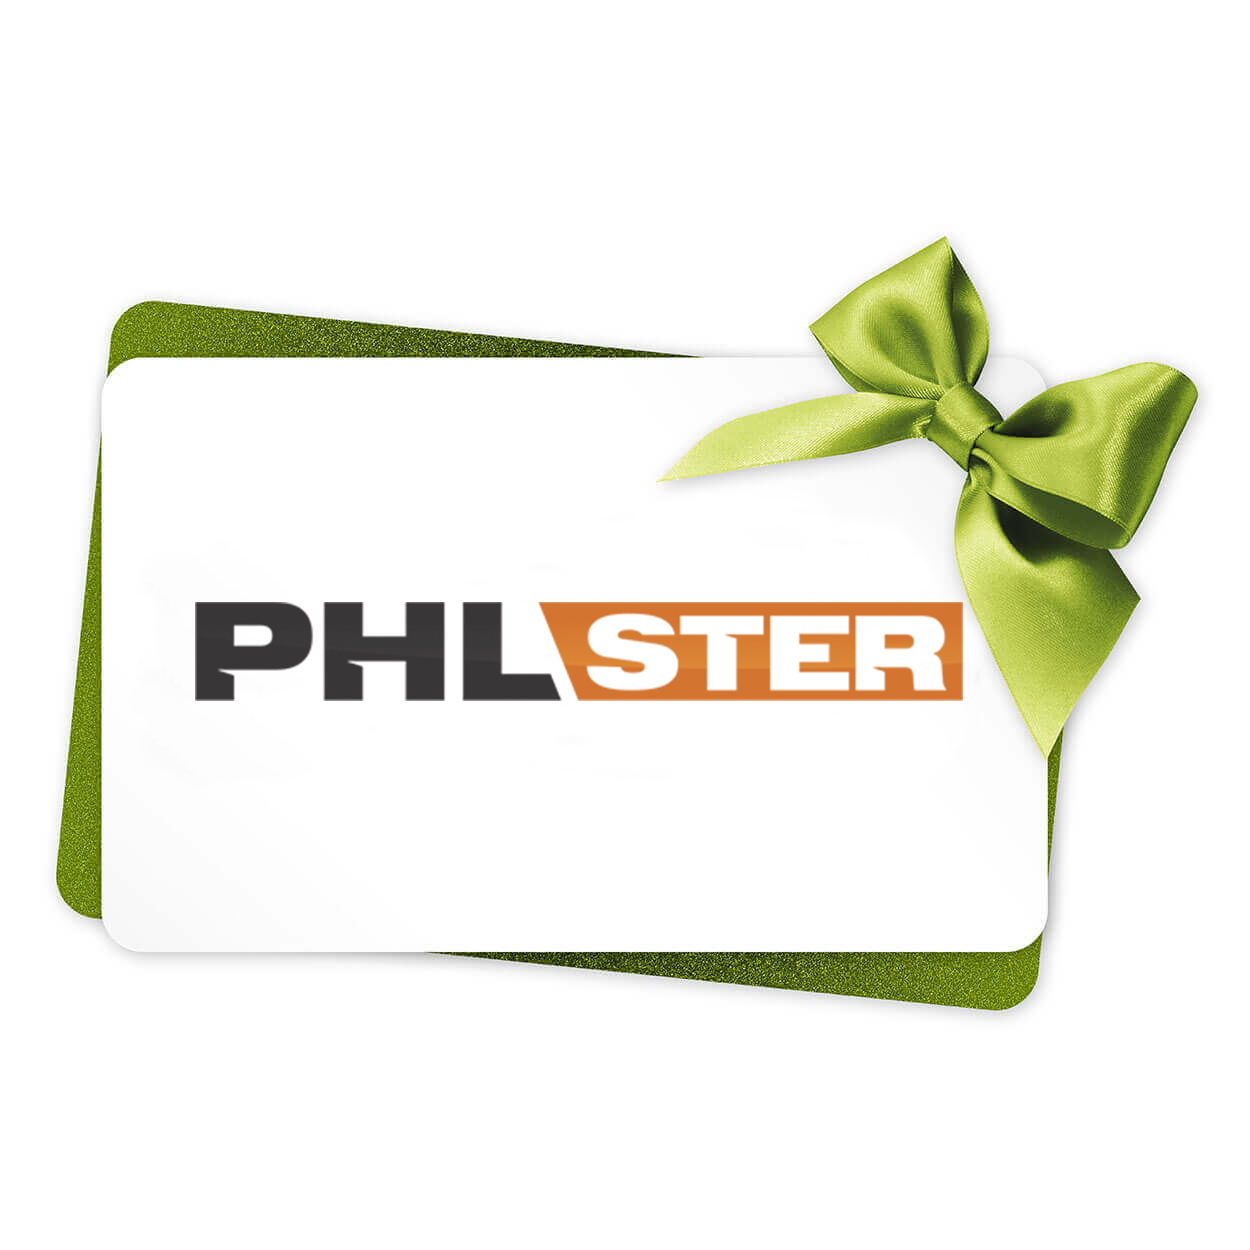 Digital Gift Card PHLSTER Kydex Holsters and Medical